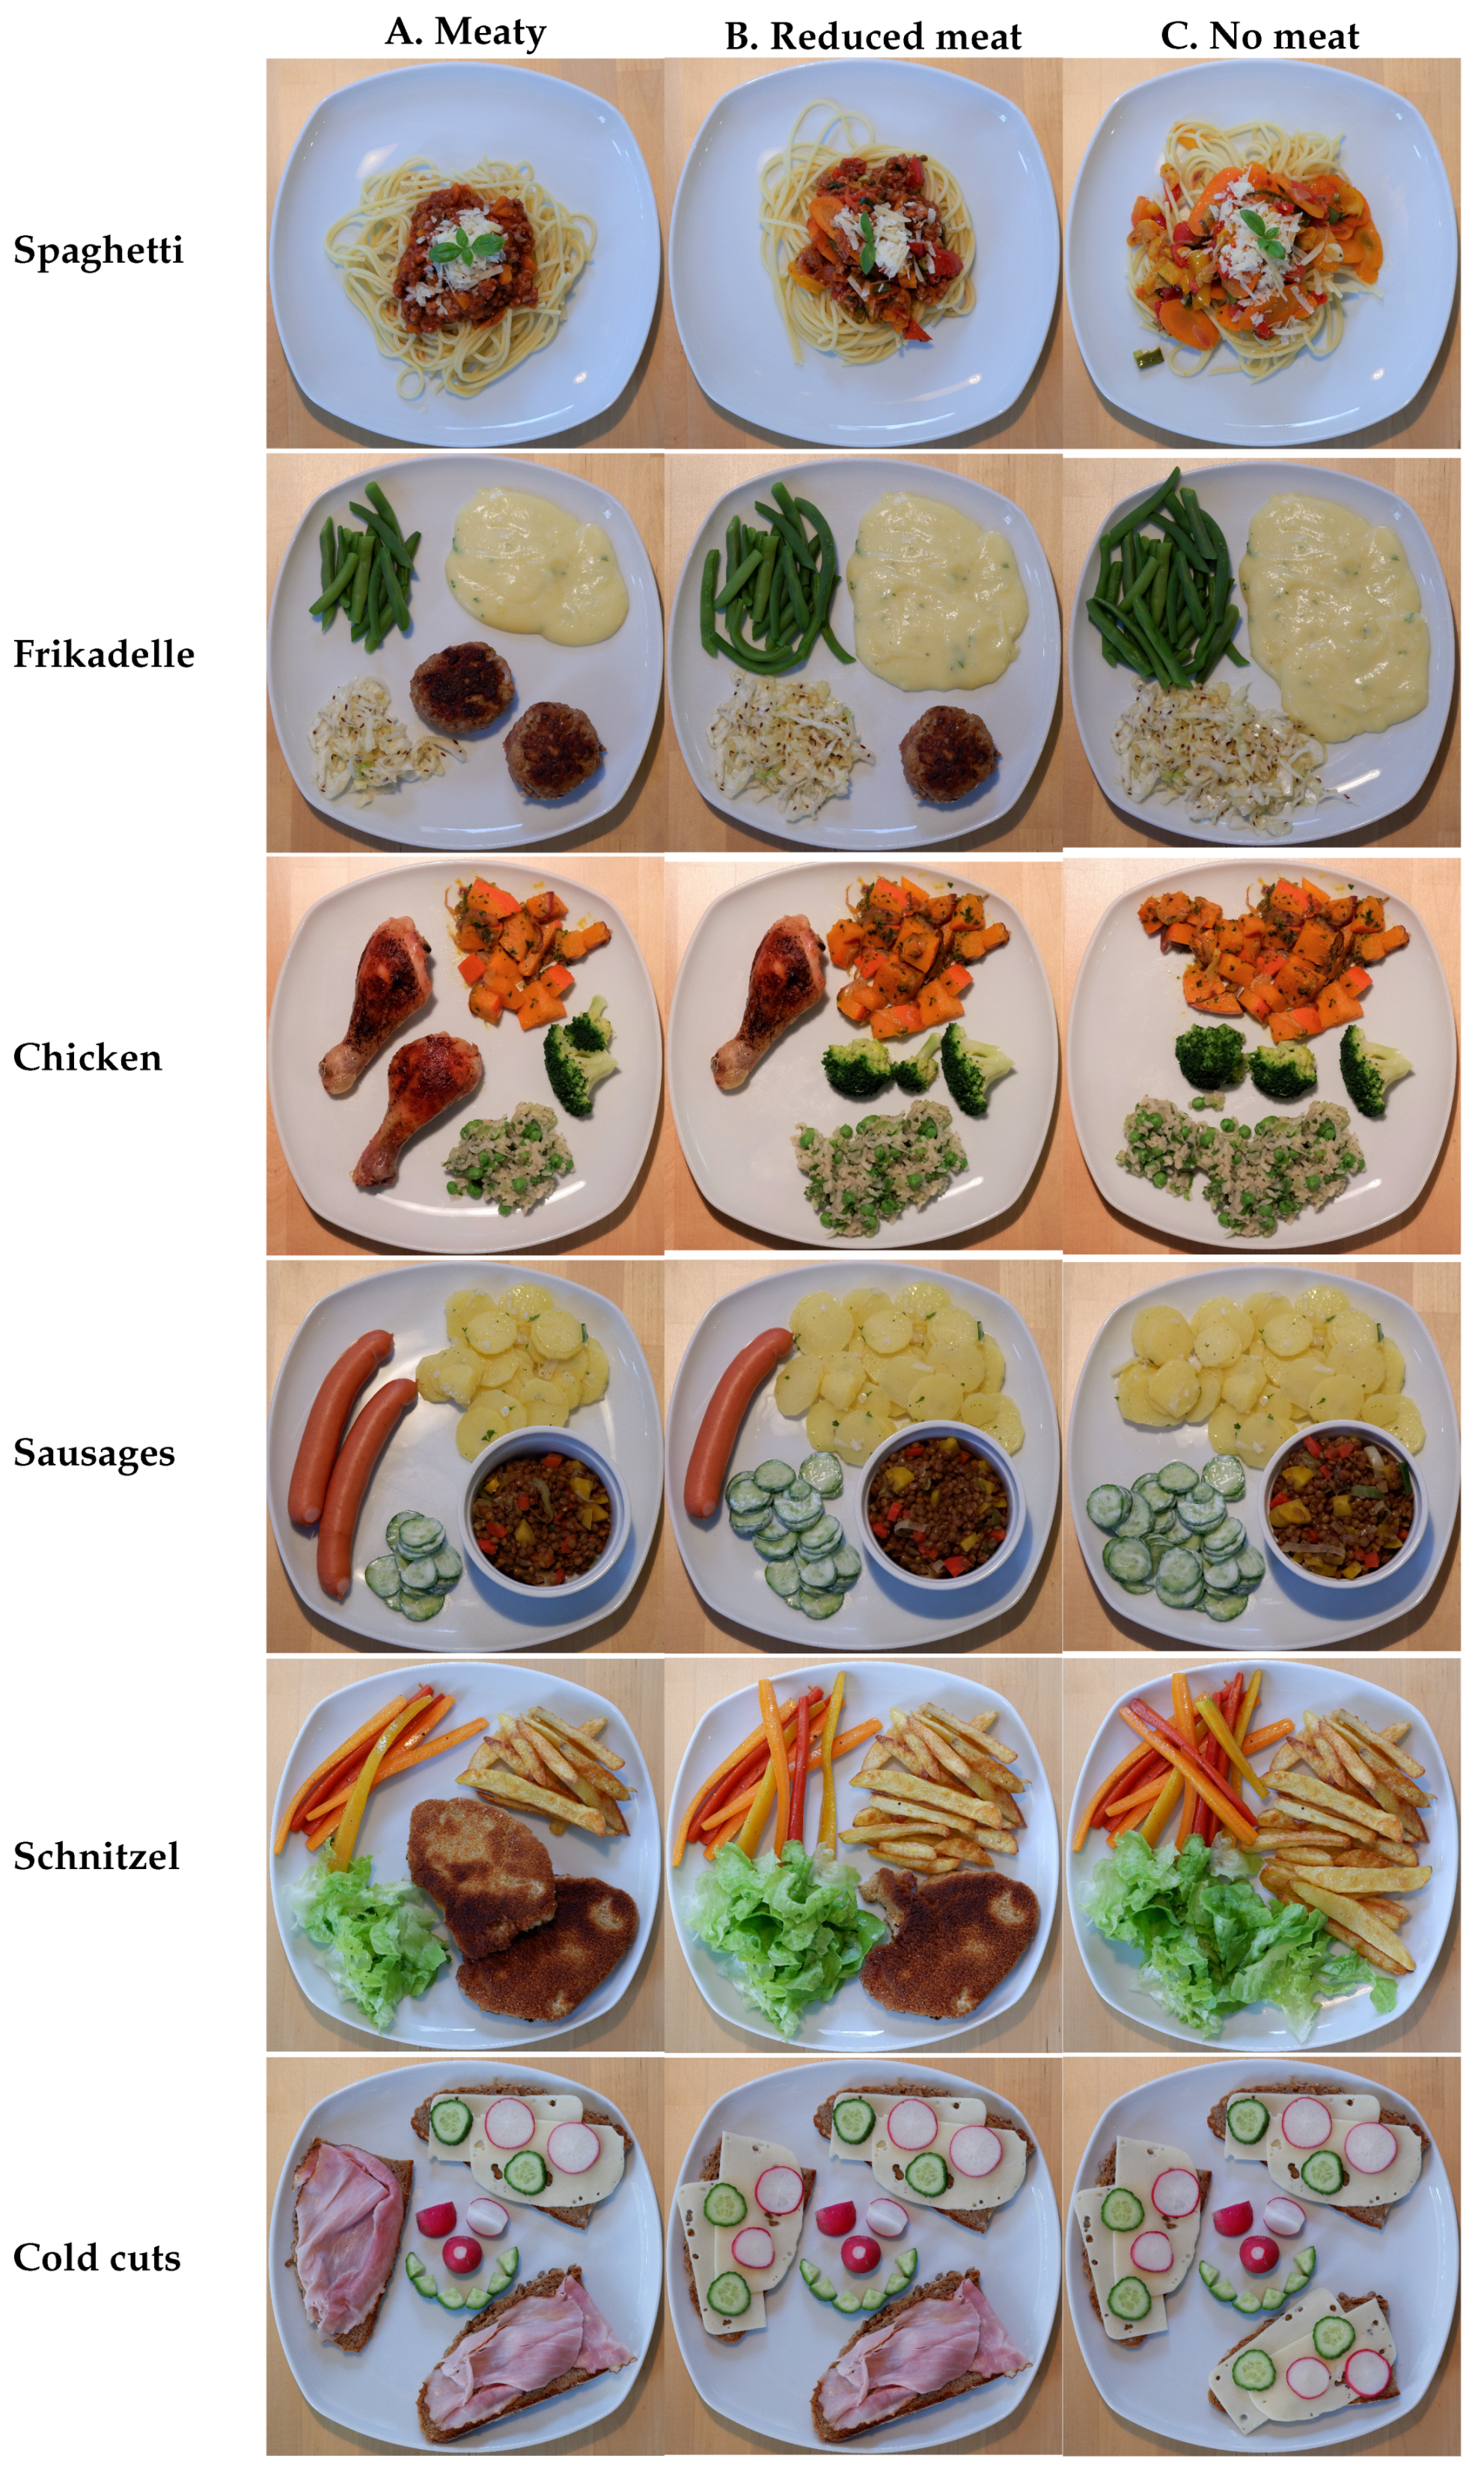 Foods | Free Full-Text | Meat Reduction in 5 to 8 Years Old Children—A  Survey to Investigate the Role of Parental Meat Attachment